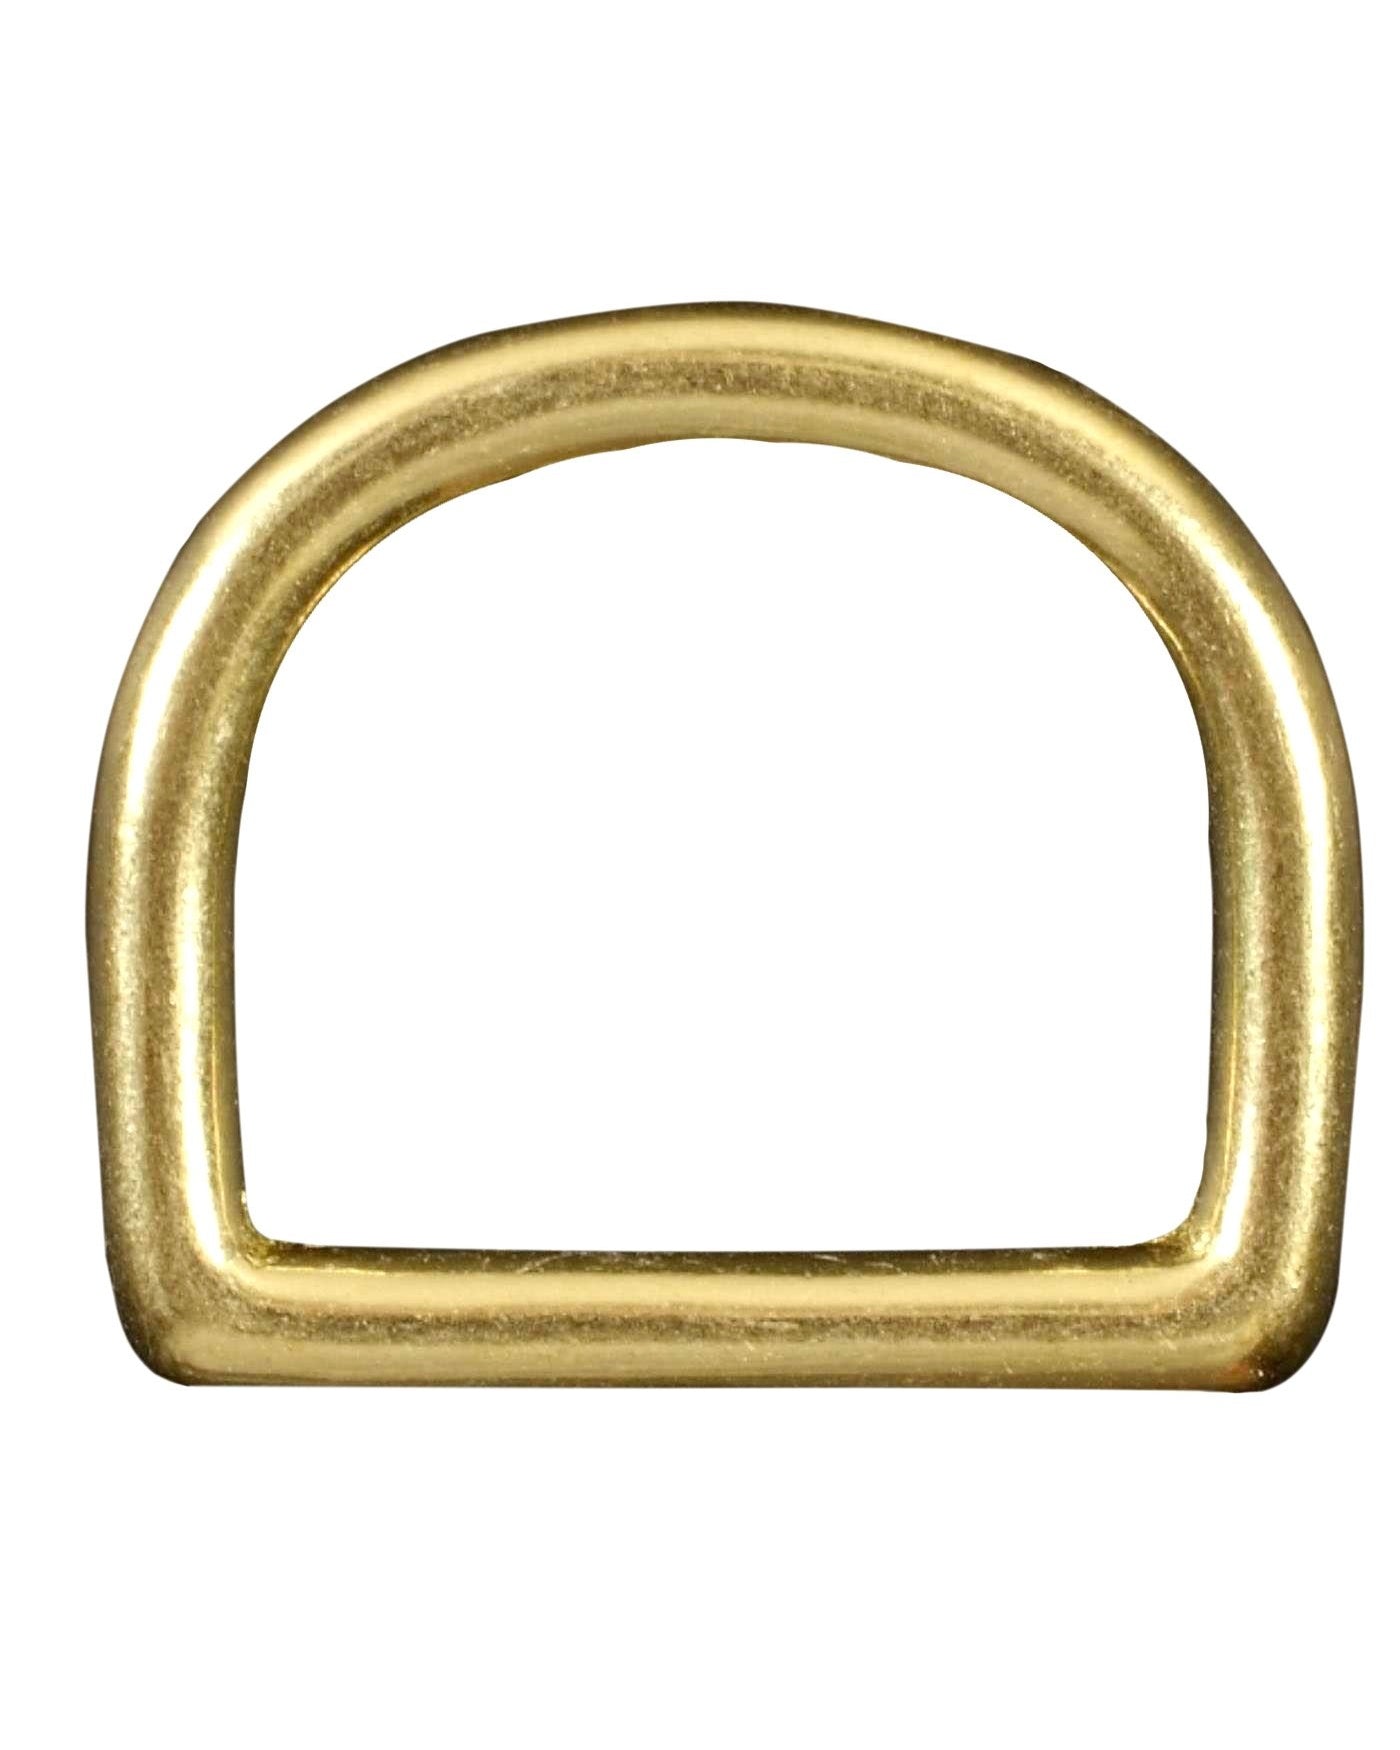 Image 1 of D-Ring, Brass (Sold Individually) - SKU# DRG-BRASS : Product Type Accessories & Parts : Elderly Instruments